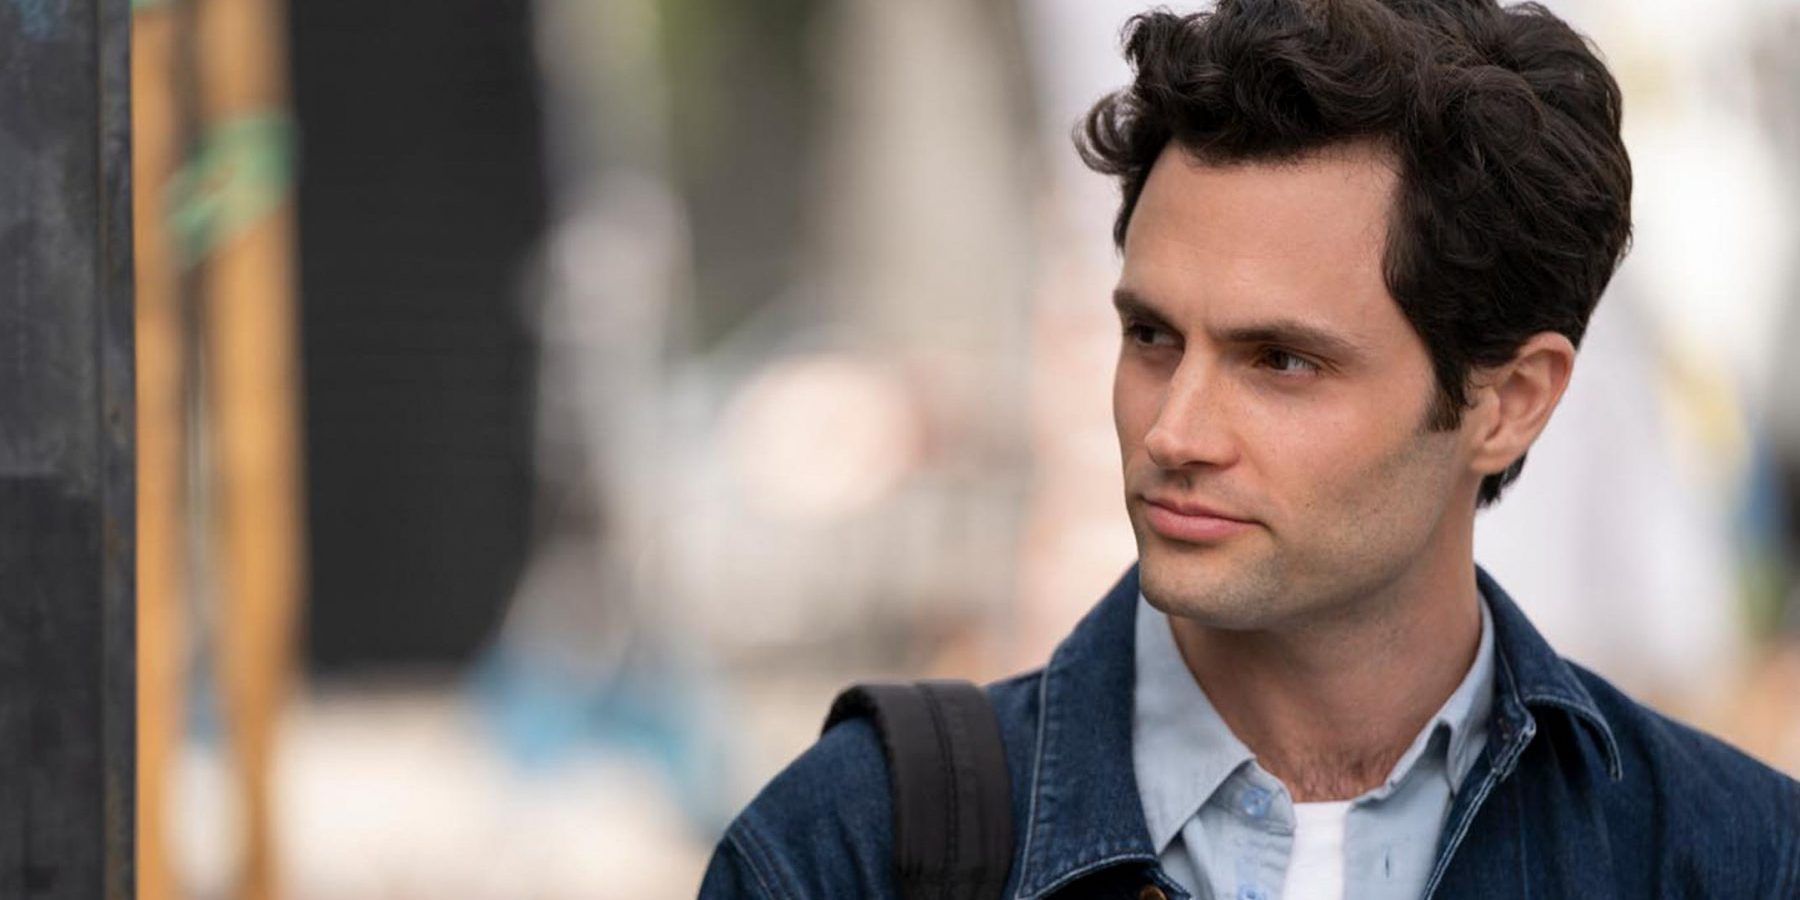 Penn Badgley On Why He Asked For No Sex Scenes In You Season 4